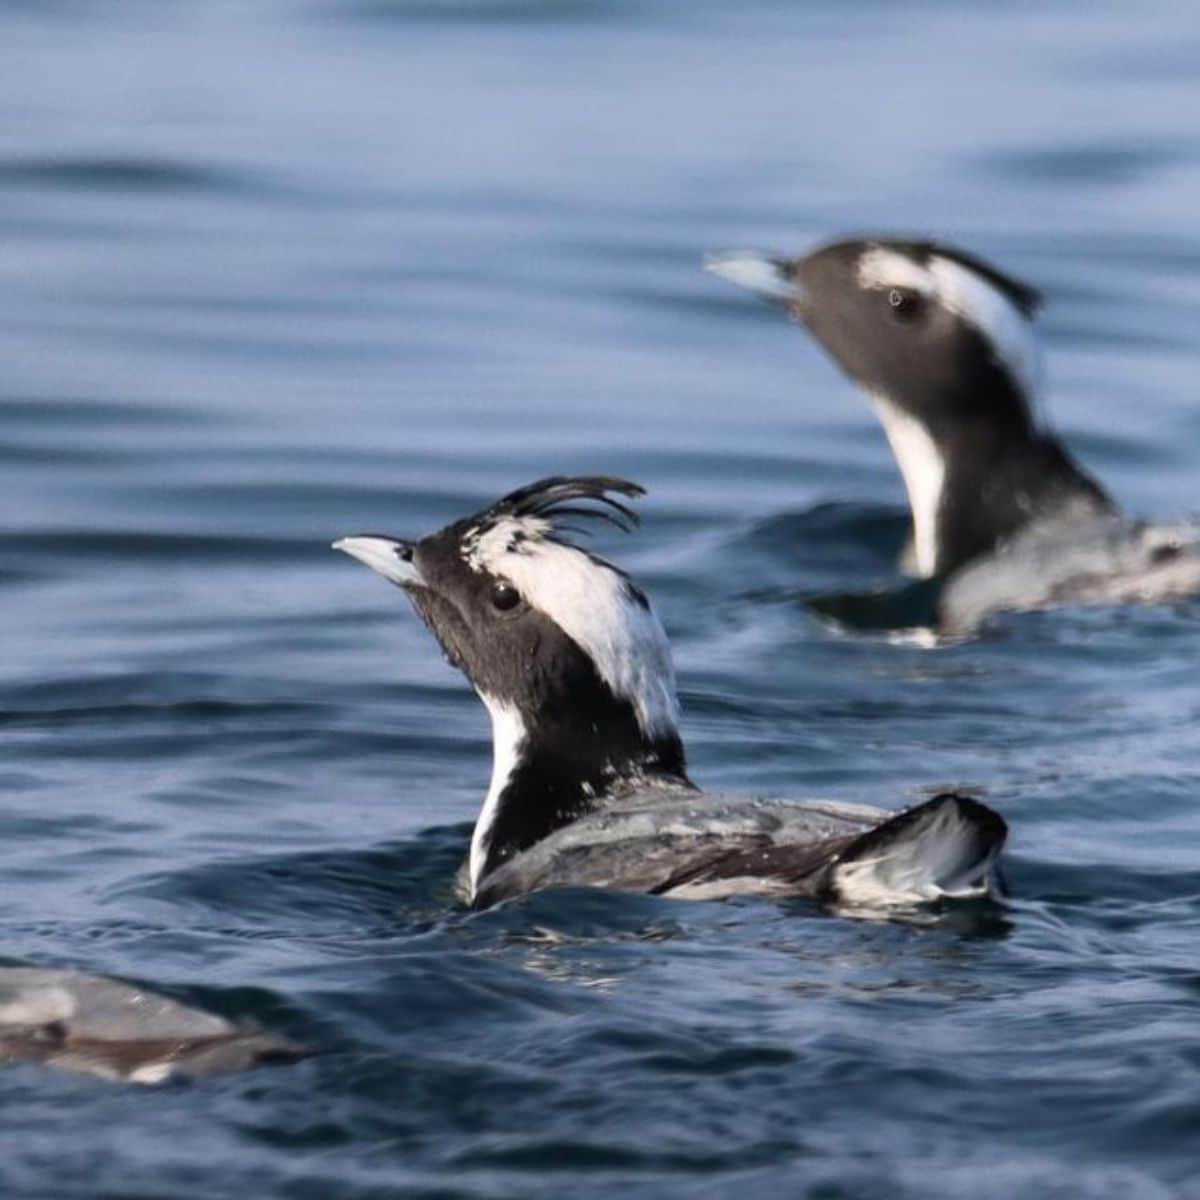 Two swimming Japanese Murrelets in the water.